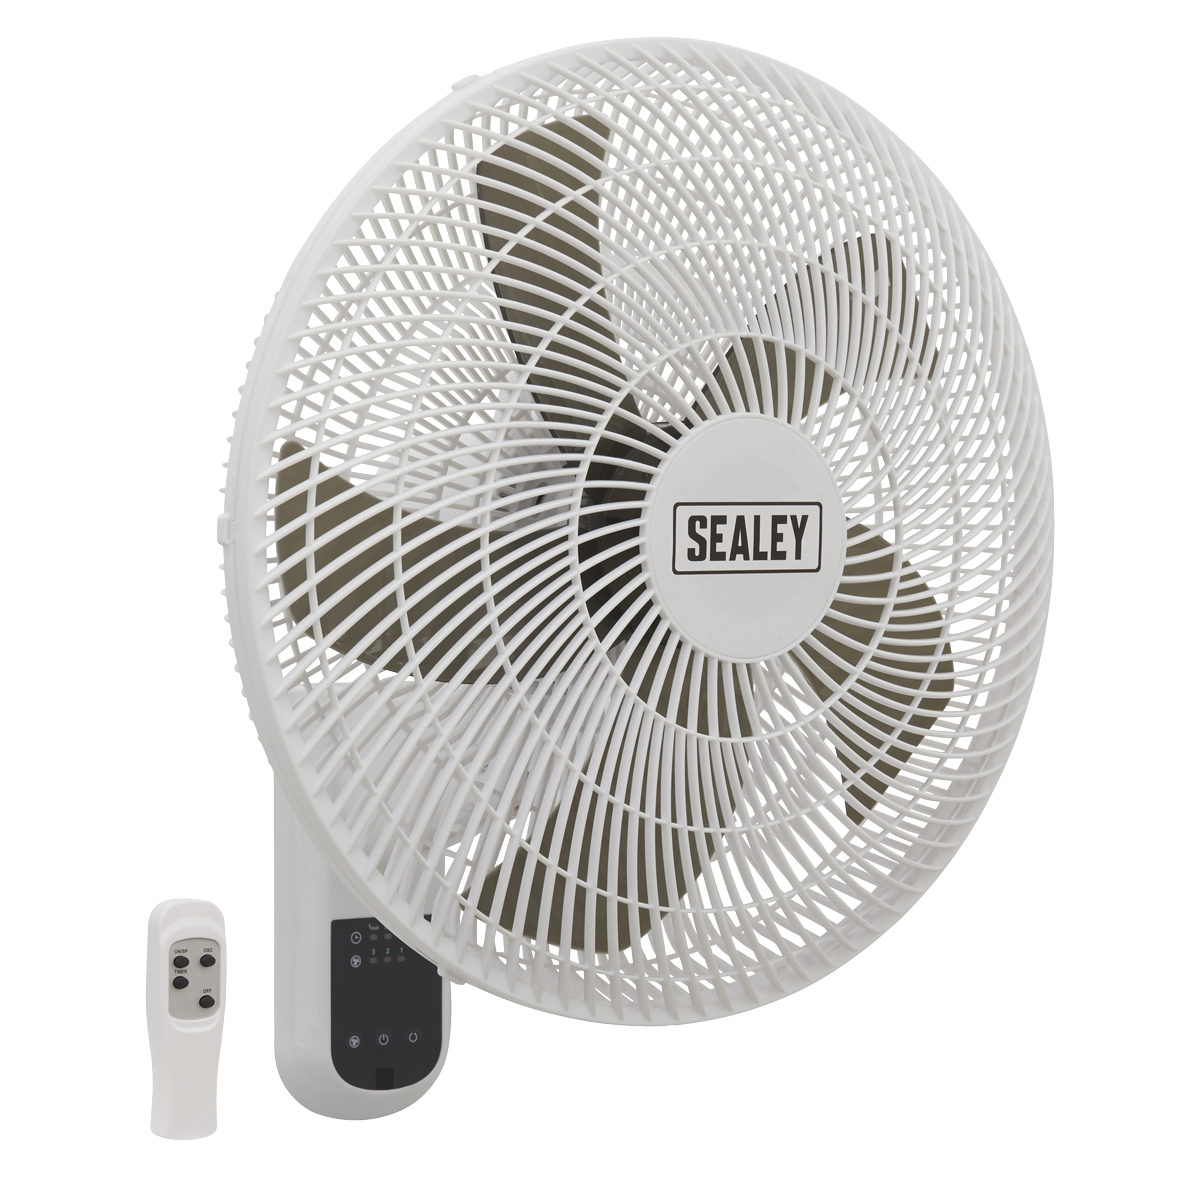 Sealey Wall Fan 3-Speed 18" with Remote Control 230V